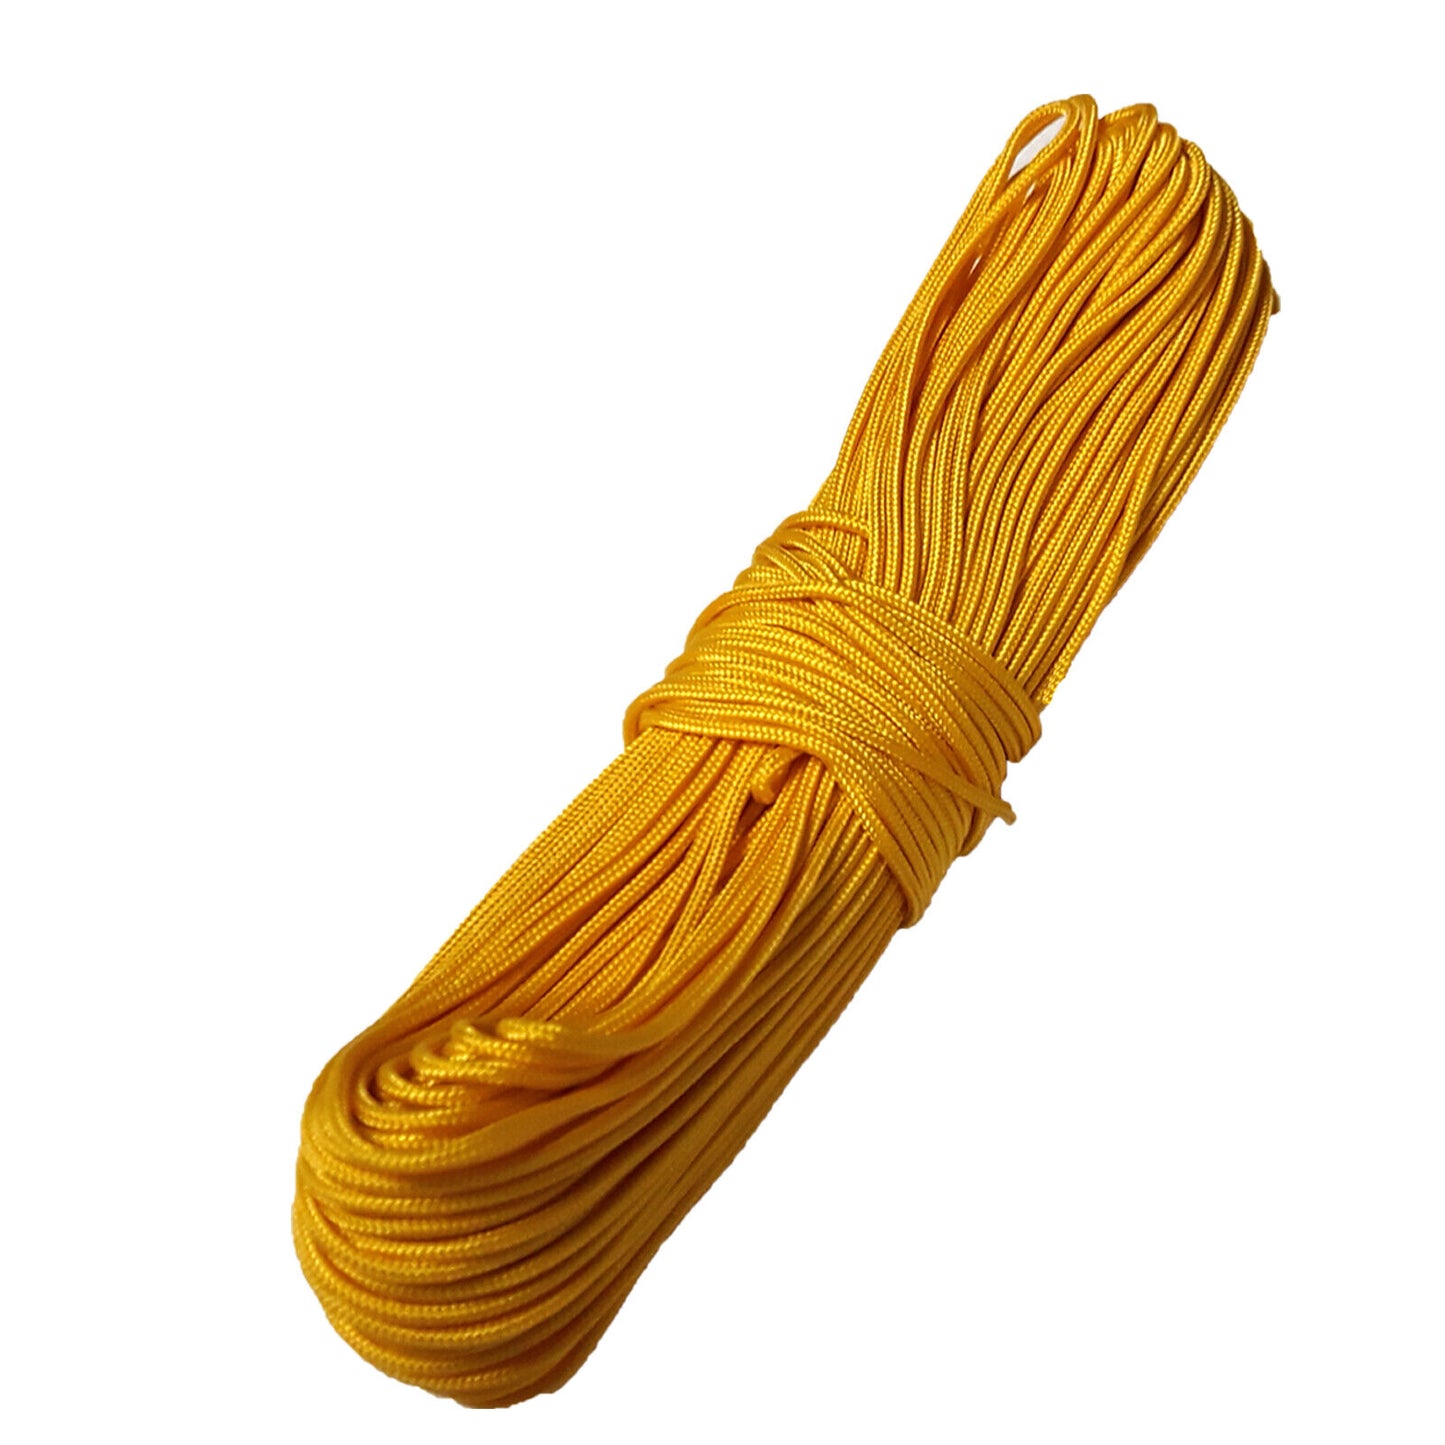 Proven Part  Arborist Yellow Paracord Throw Line 2Mm - 1/8 In. By 150 Feet